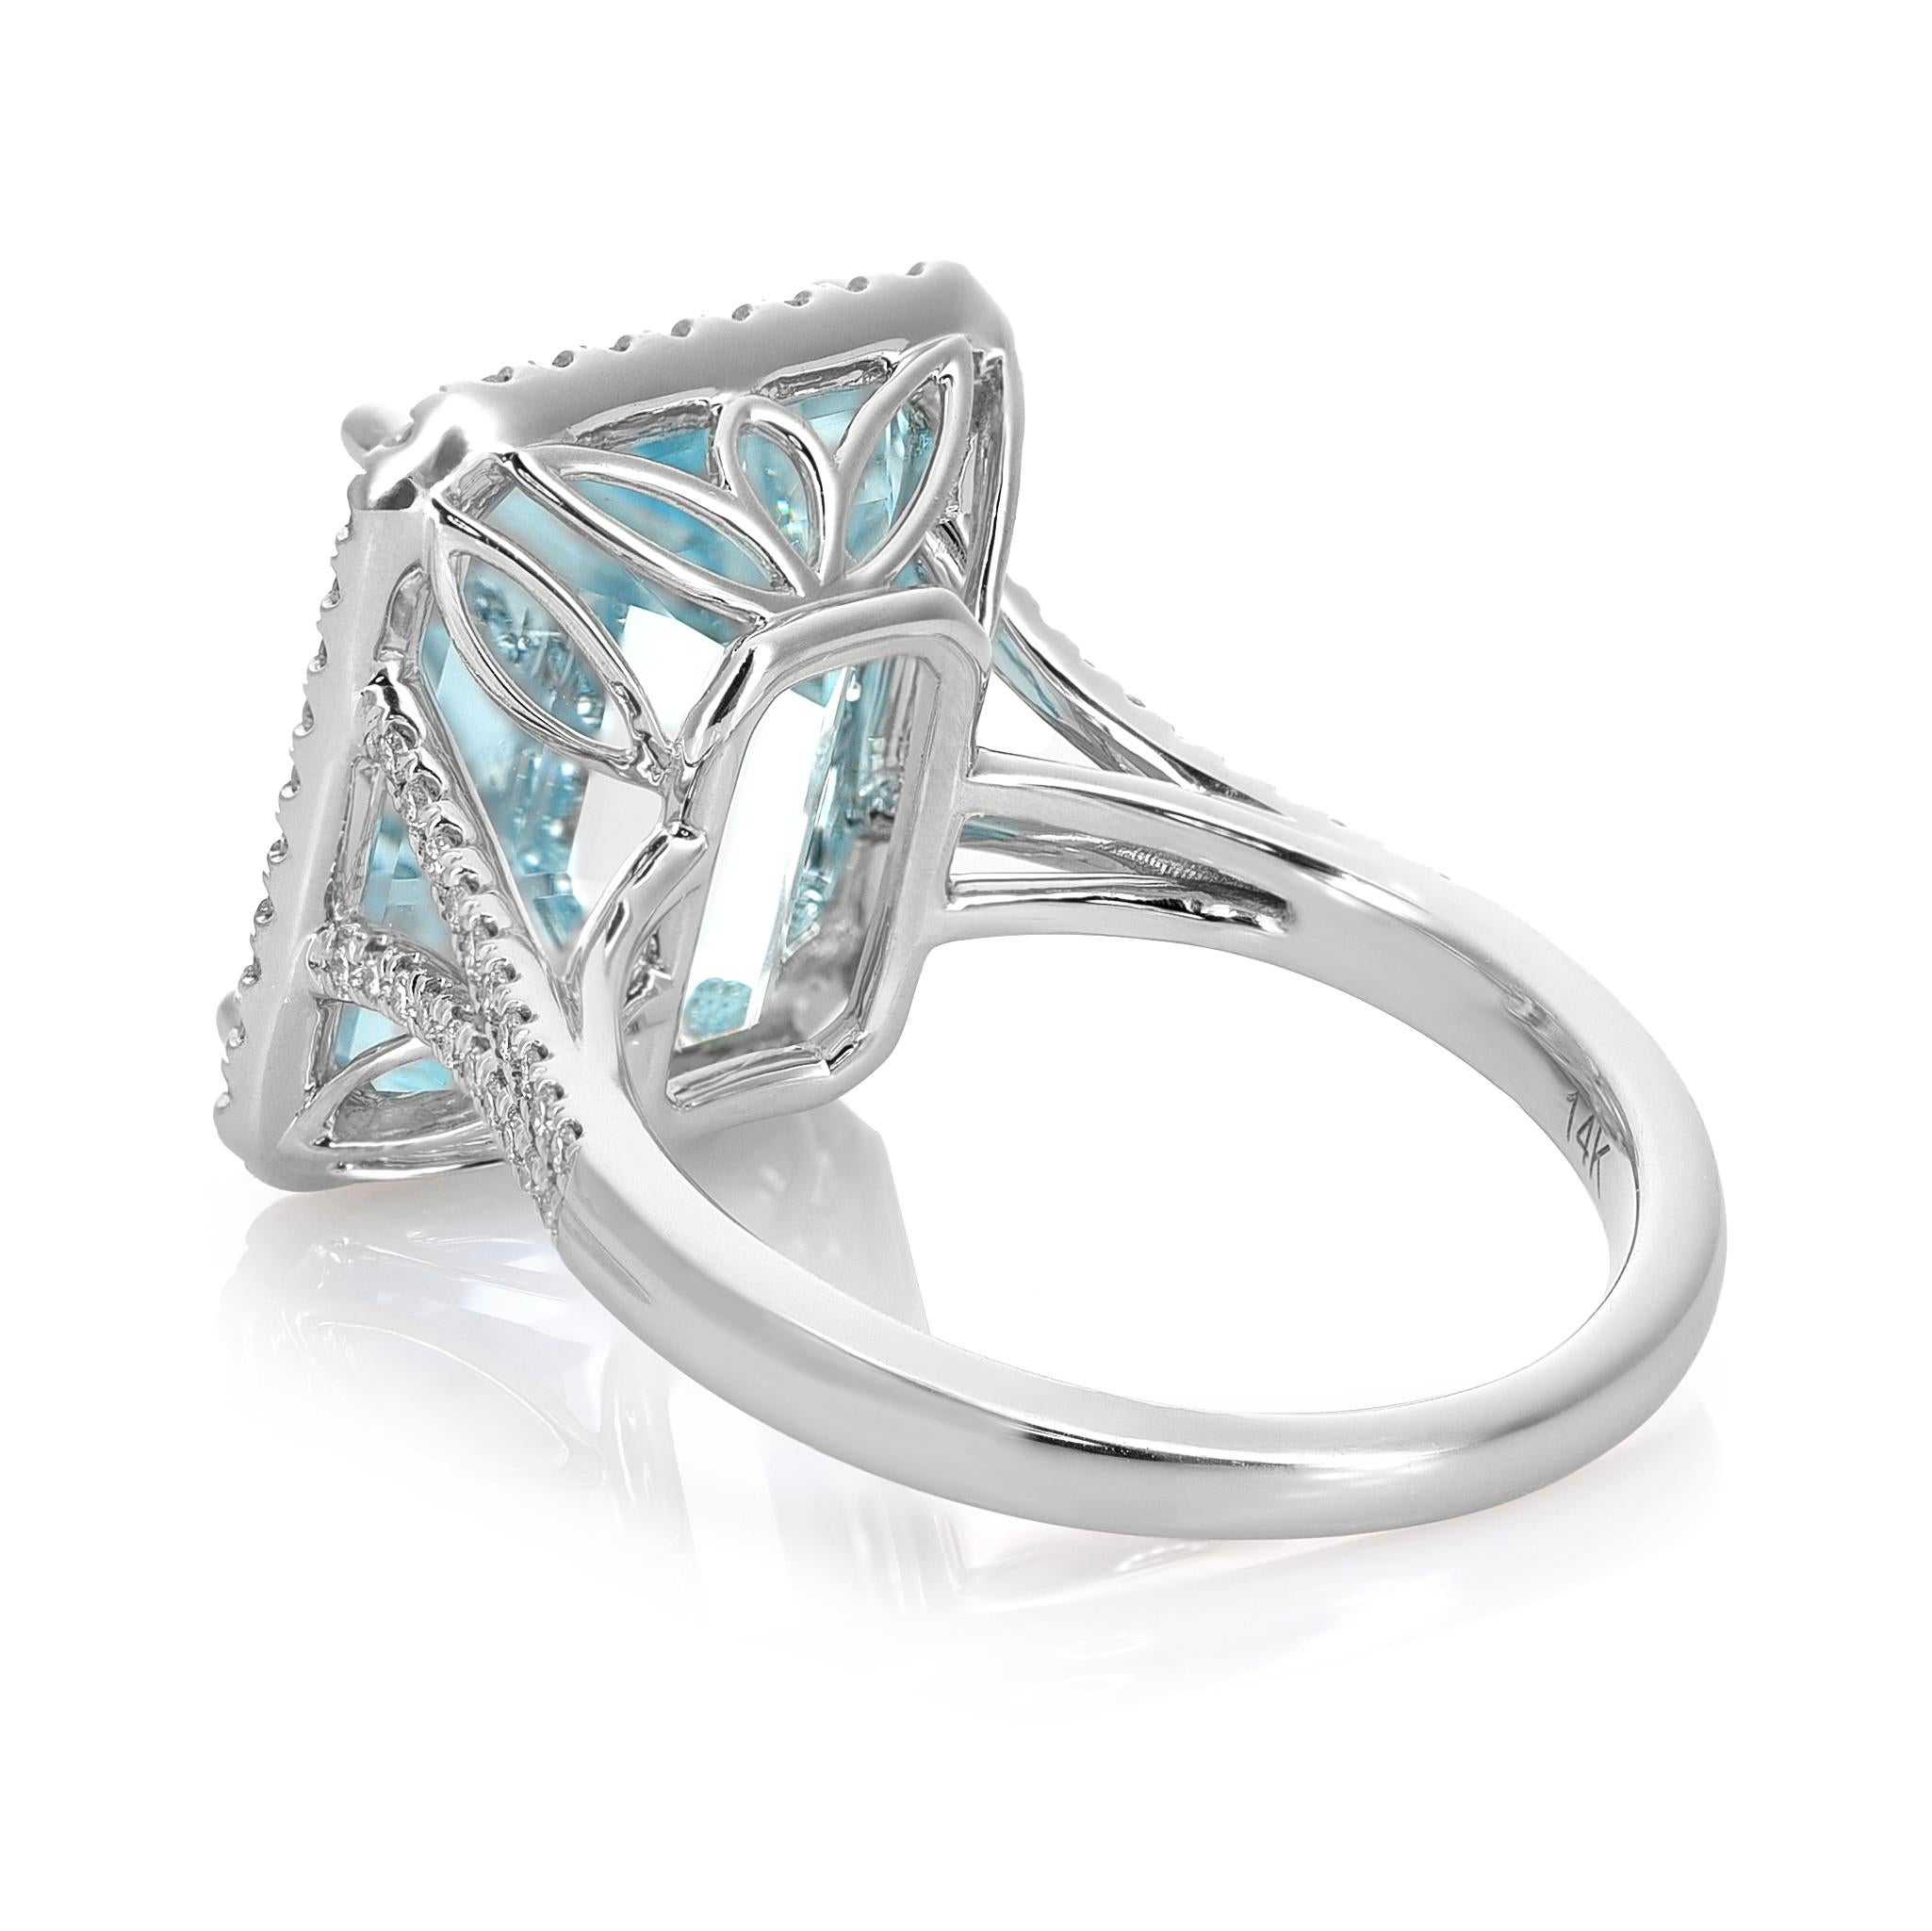 Mixed Cut 9.45 Carats Aquamarine Diamonds set in 14K White Gold Ring For Sale